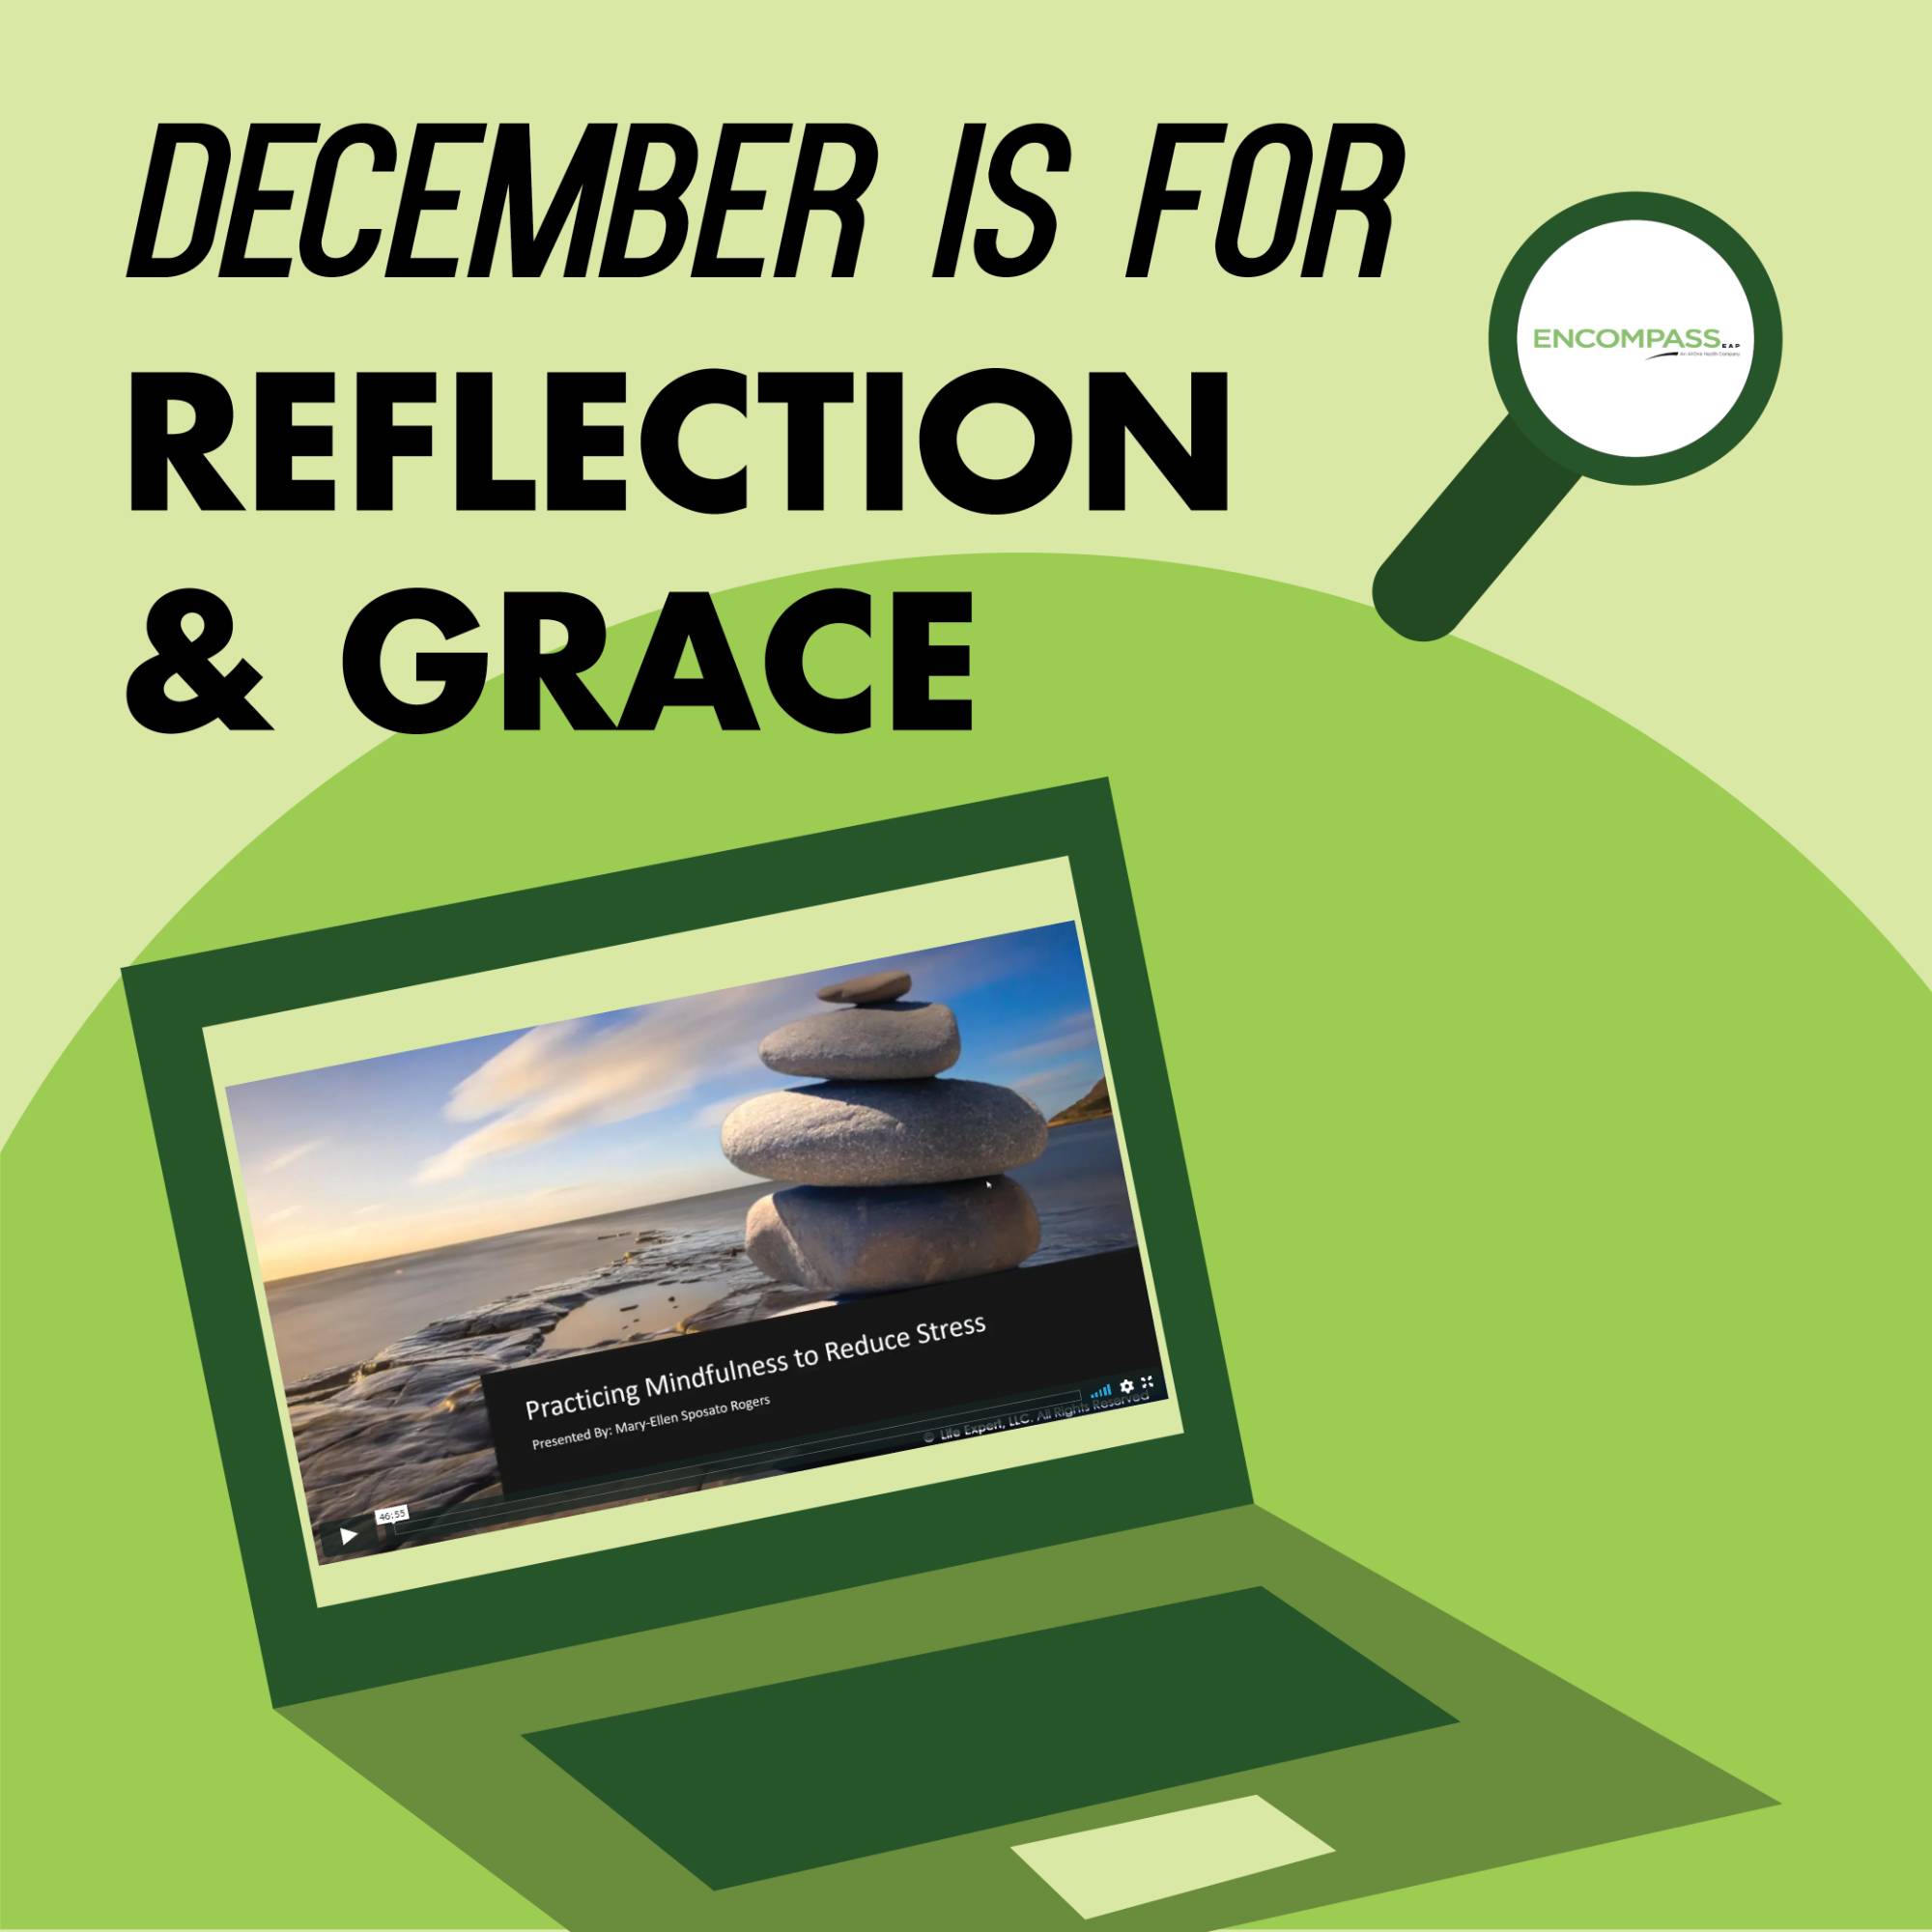 December is for Reflection and Grace